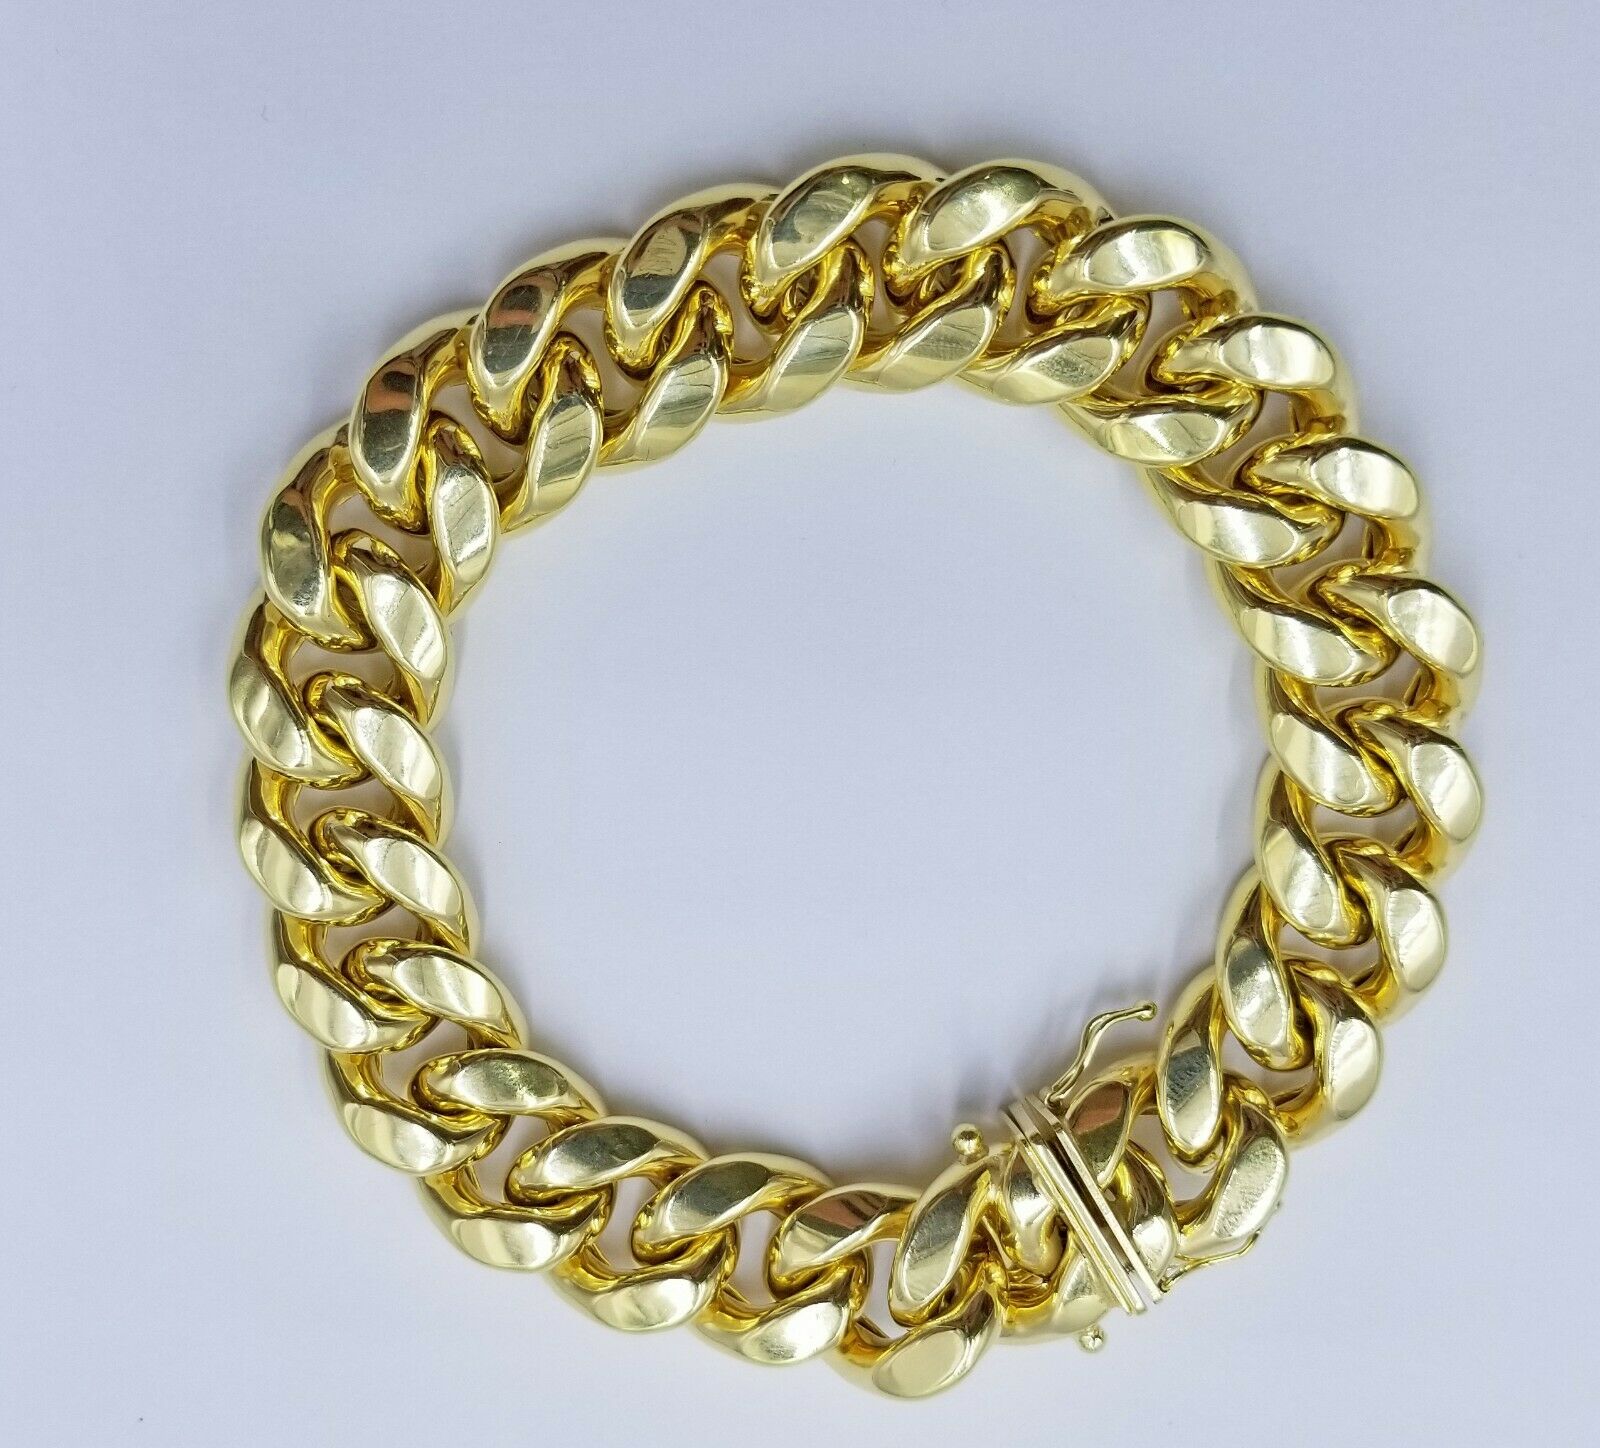 15mm 10k Gold Mens Bracelet Miami Cuban Link 7.5" Thick 10kt Yellow Gold REAL